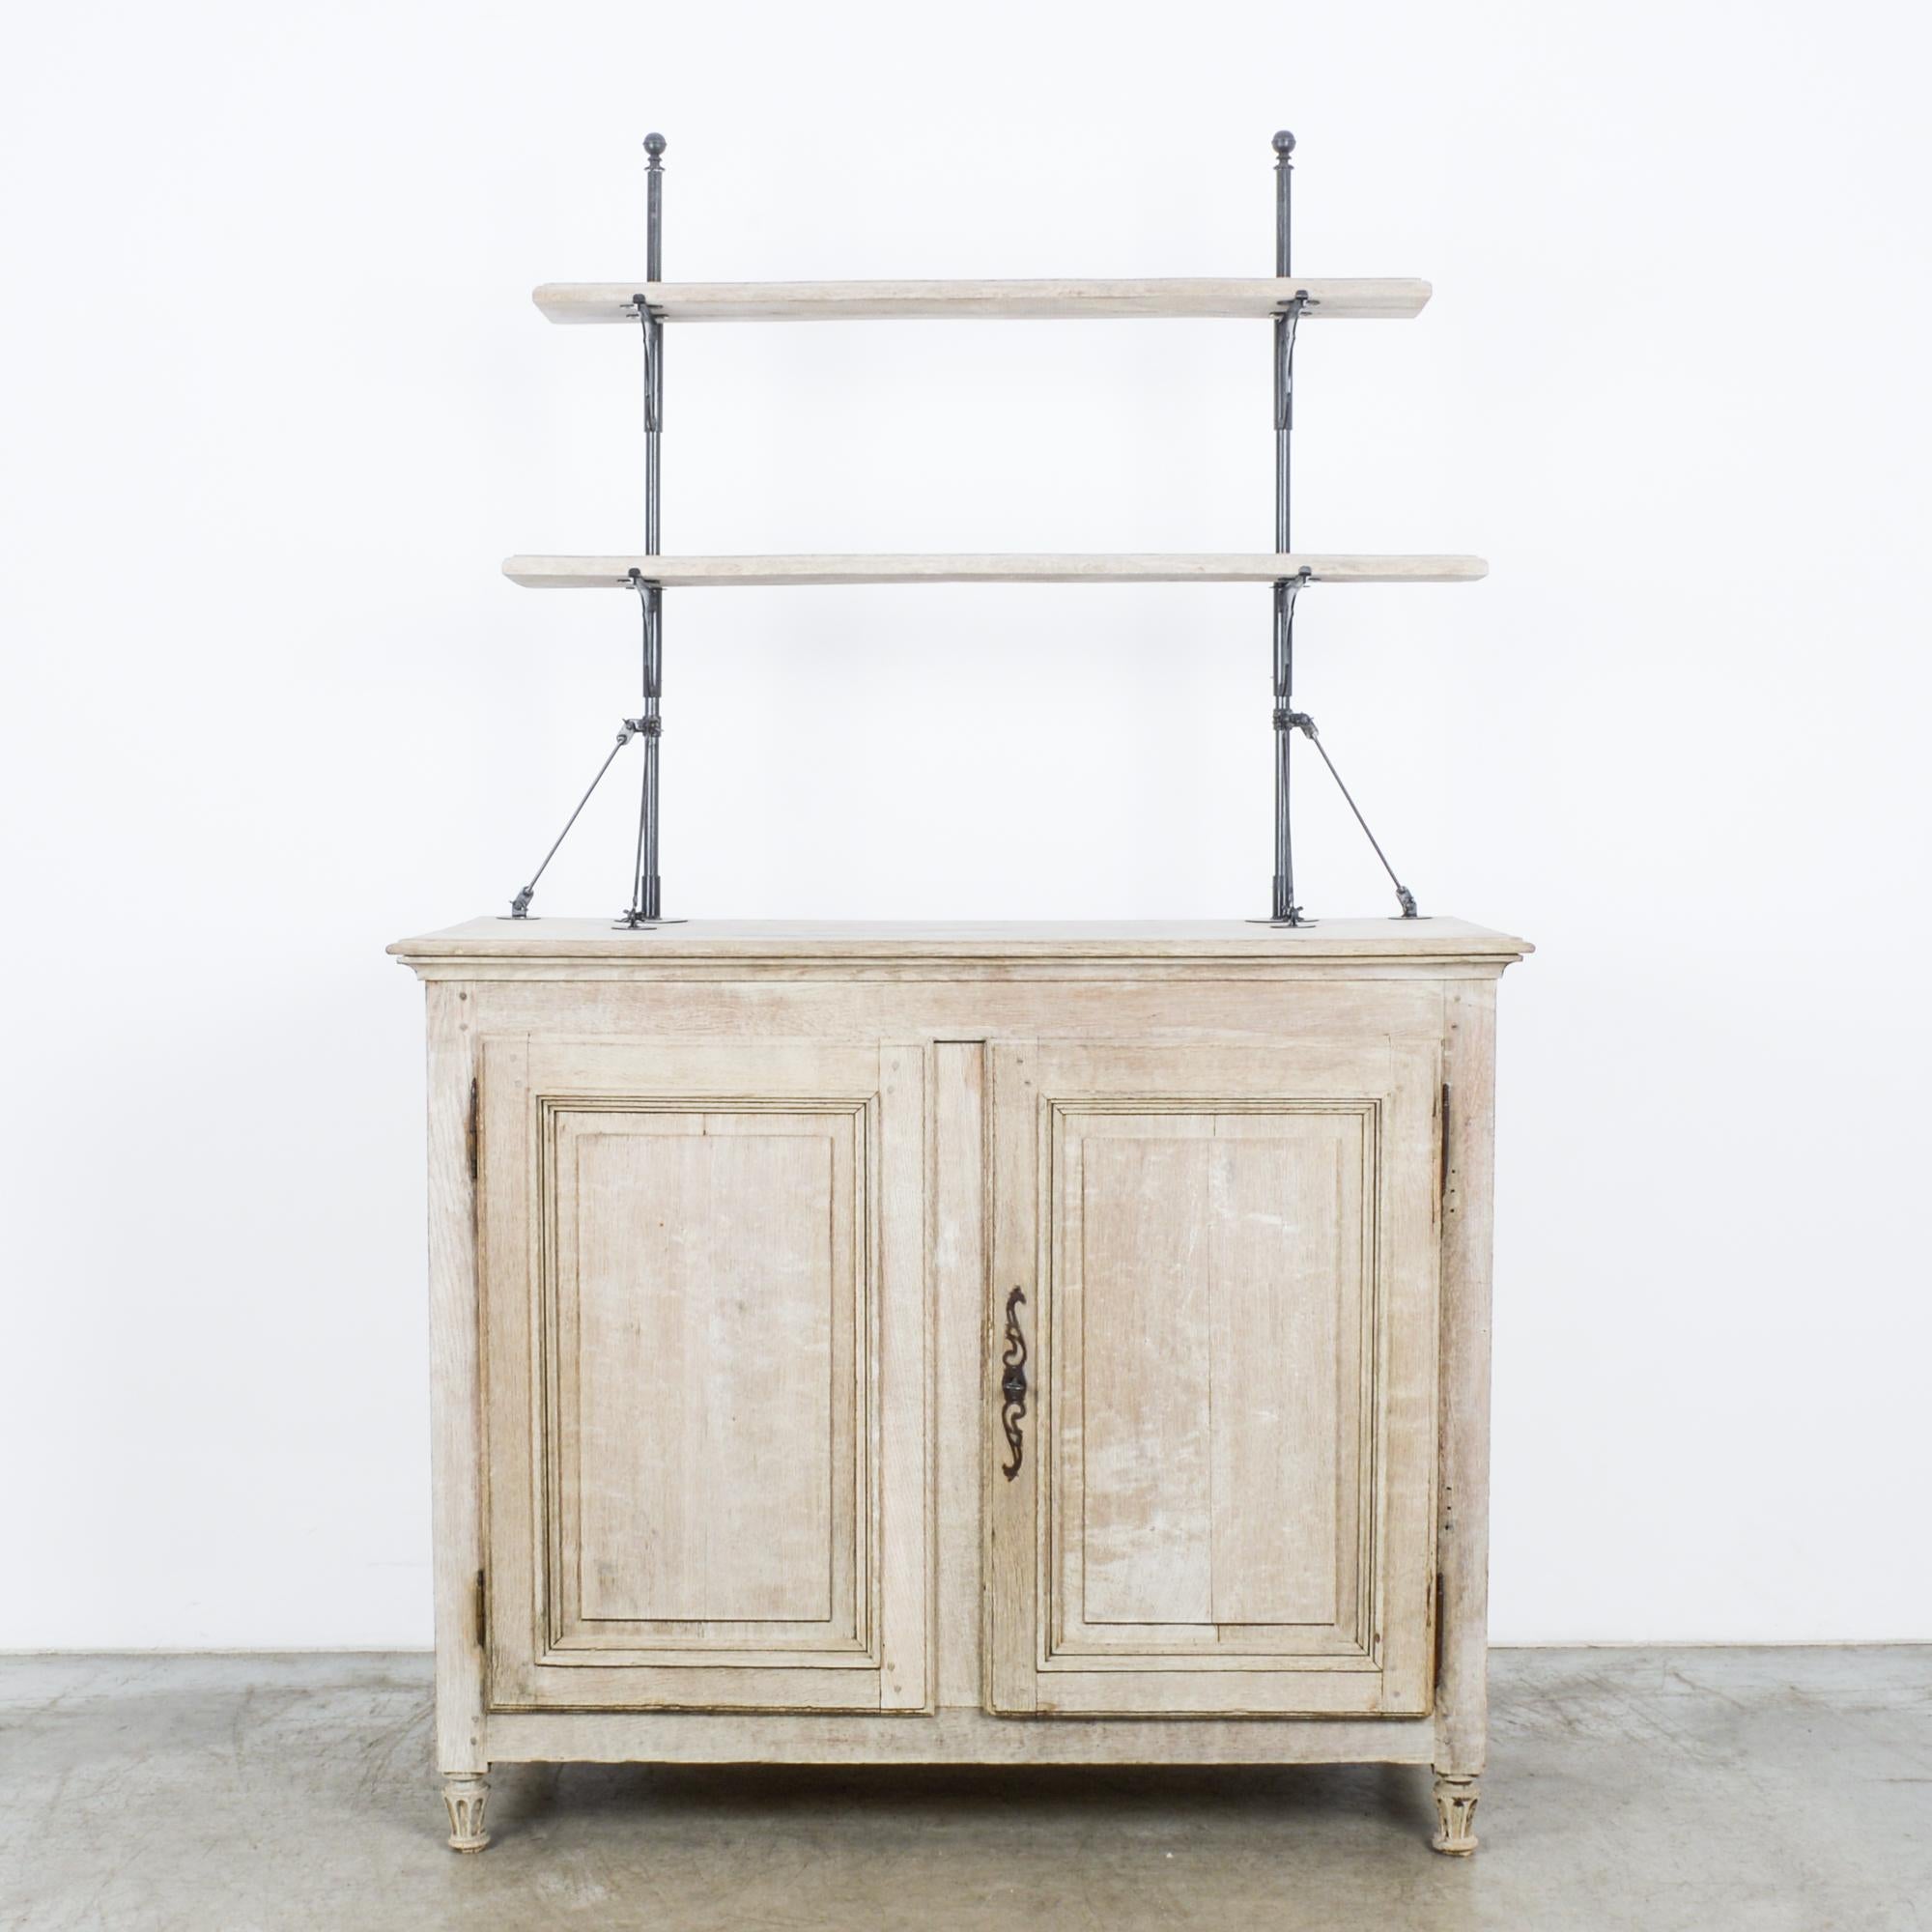 This bleached oak cabinet was made in France, circa 1860. The display portion is refurnished with metallic shelving supports and decorative brackets, creating a piece that blends a rustic farmhouse charm with an Industrial edge. The credenza below